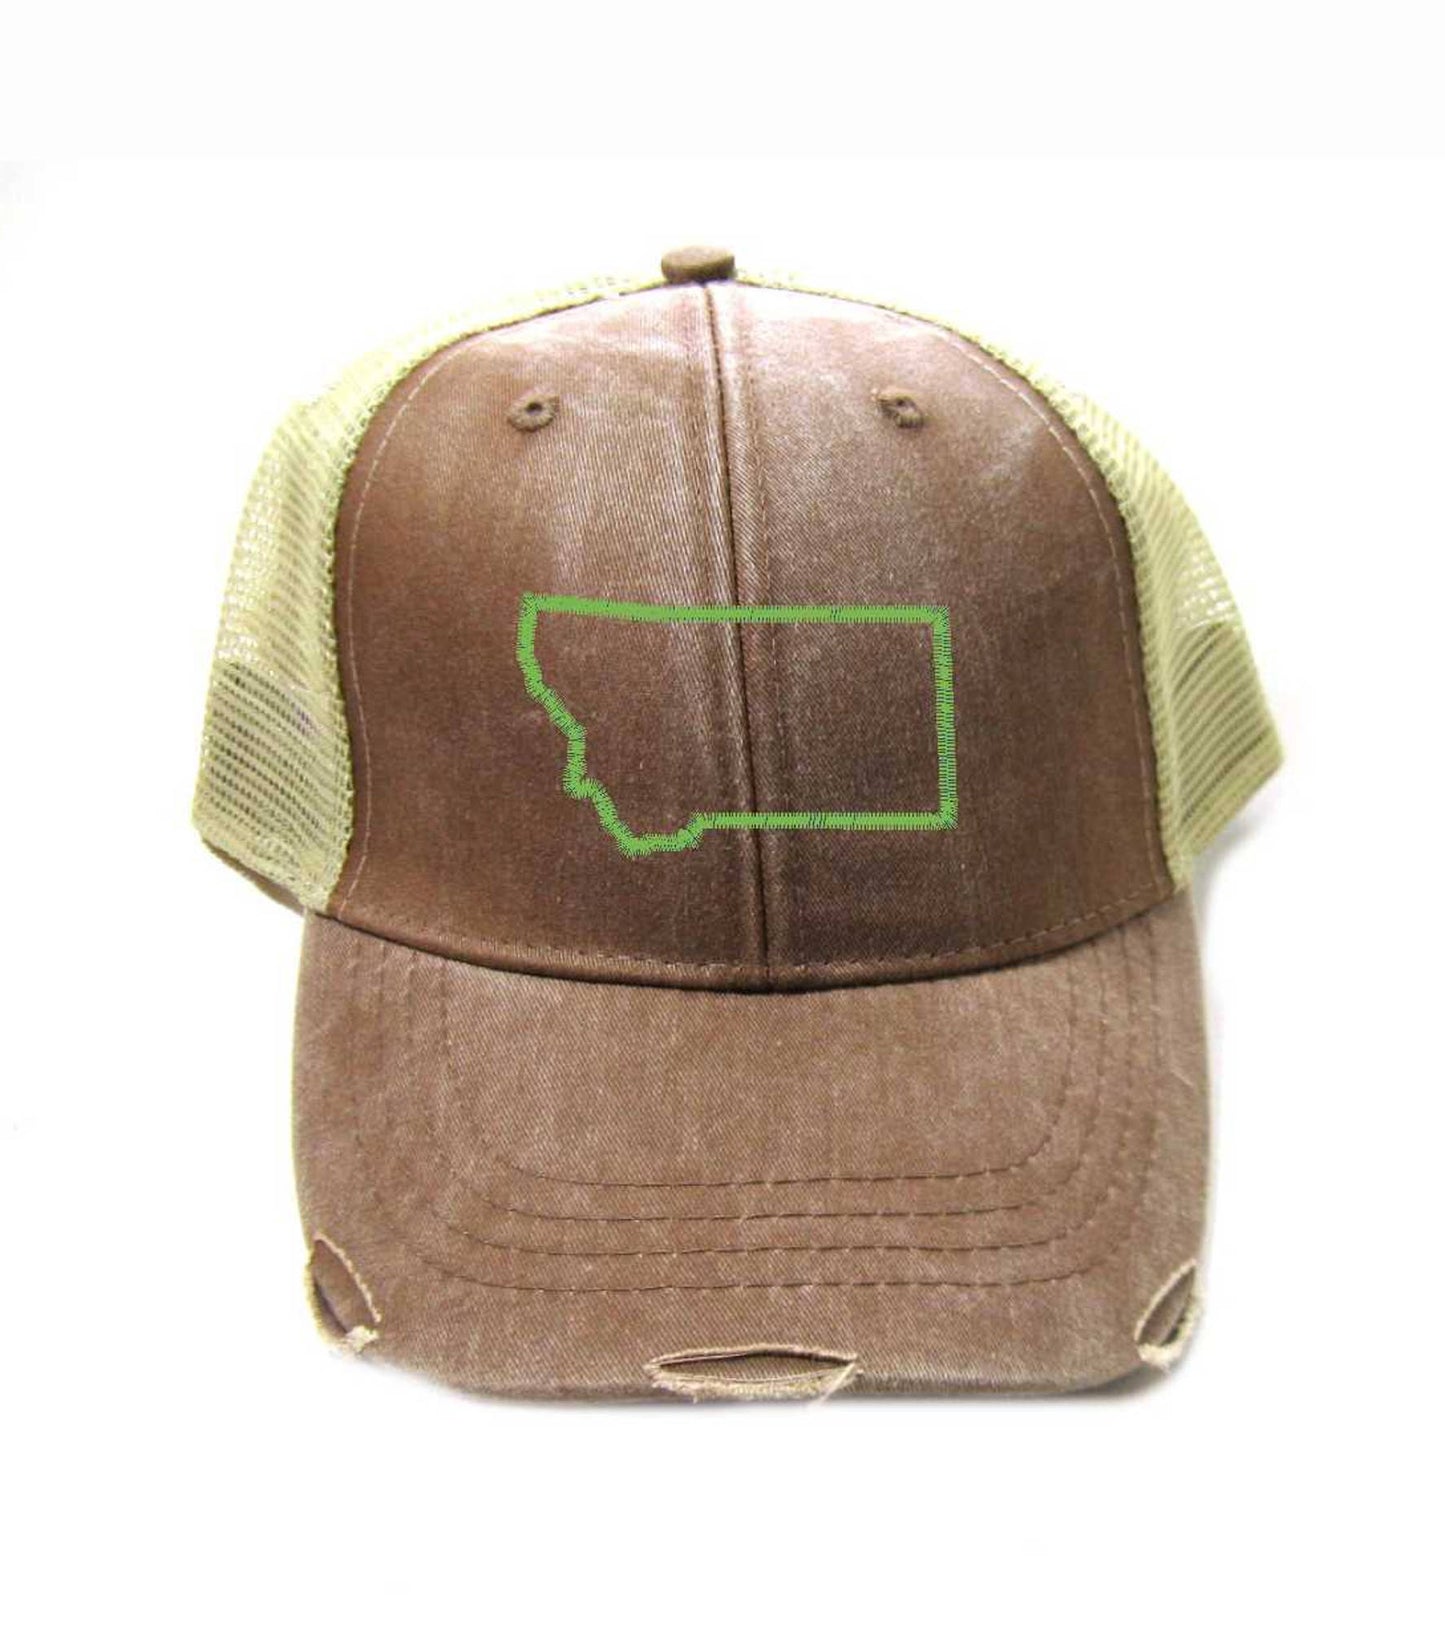 Montana Hat - Distressed Snapback Trucker Hat - Montana State Outline - Many Colors Available